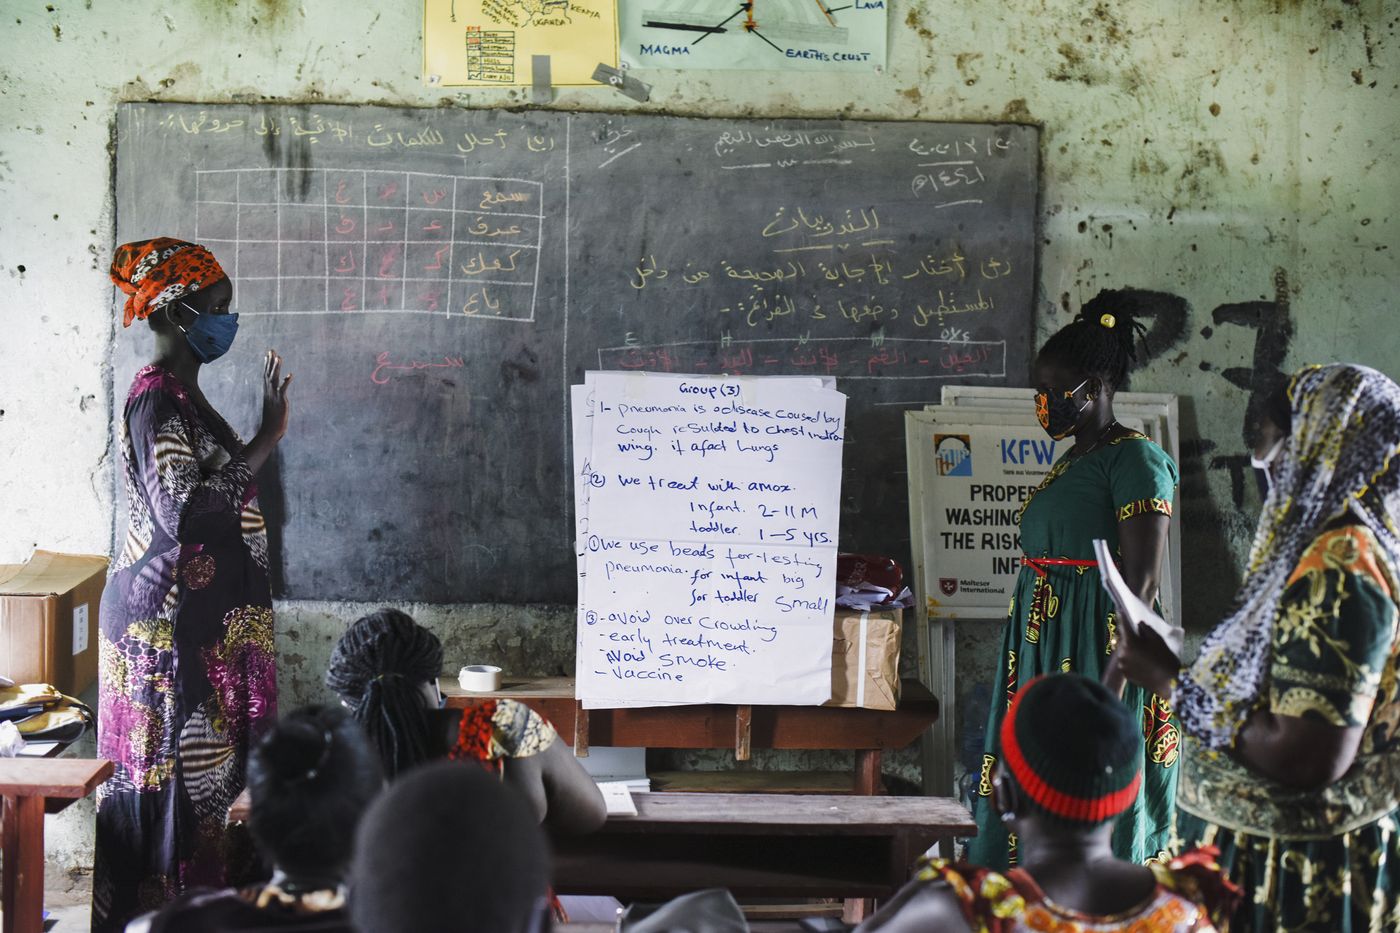 South Sudanese NGO "Health Link" trains community health workers.